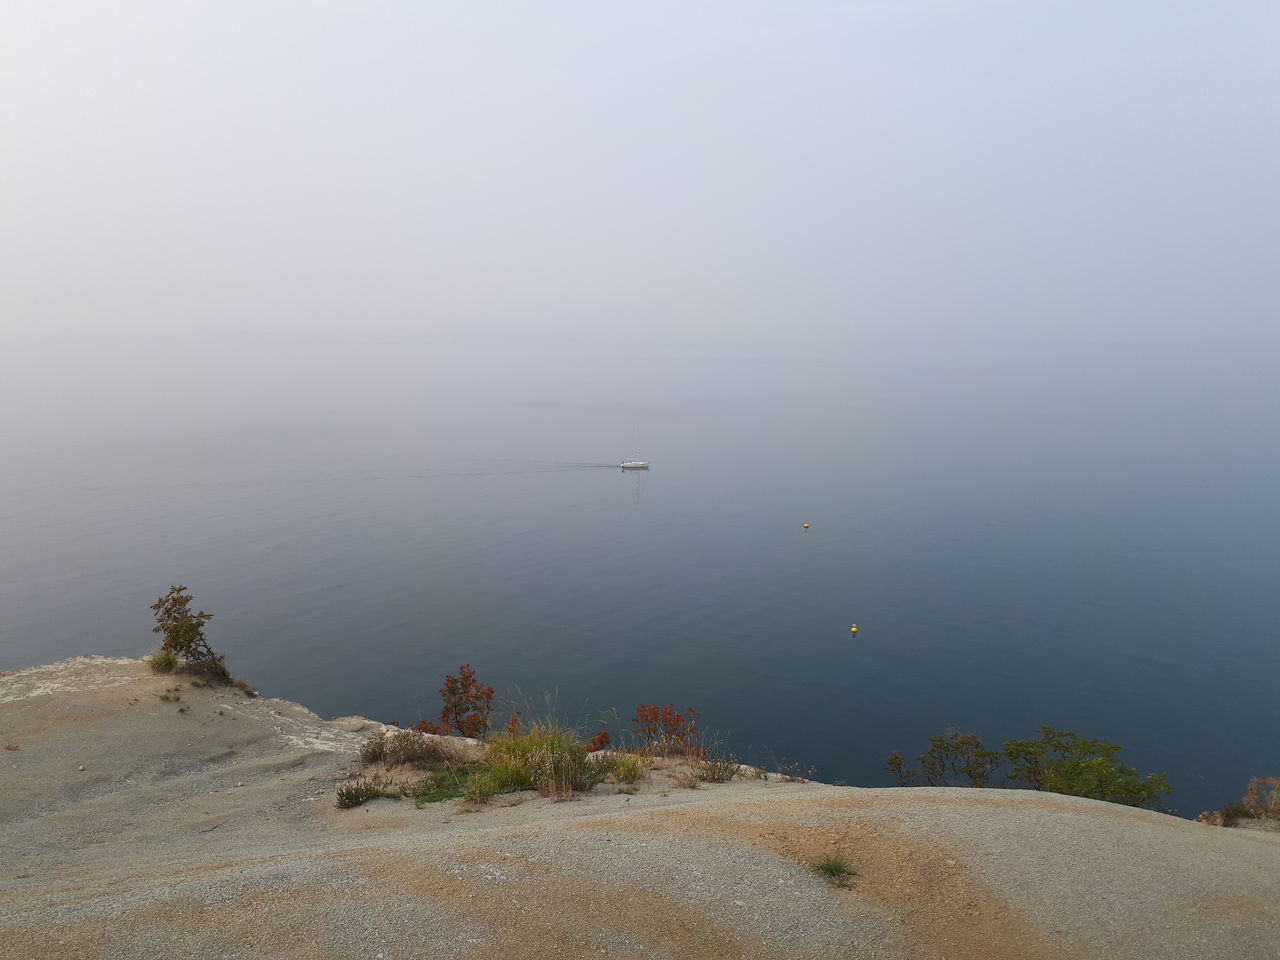 water, beauty in nature, scenics - nature, tranquility, tranquil scene, sea, sky, no people, day, beach, nature, land, fog, non-urban scene, idyllic, outdoors, copy space, high angle view